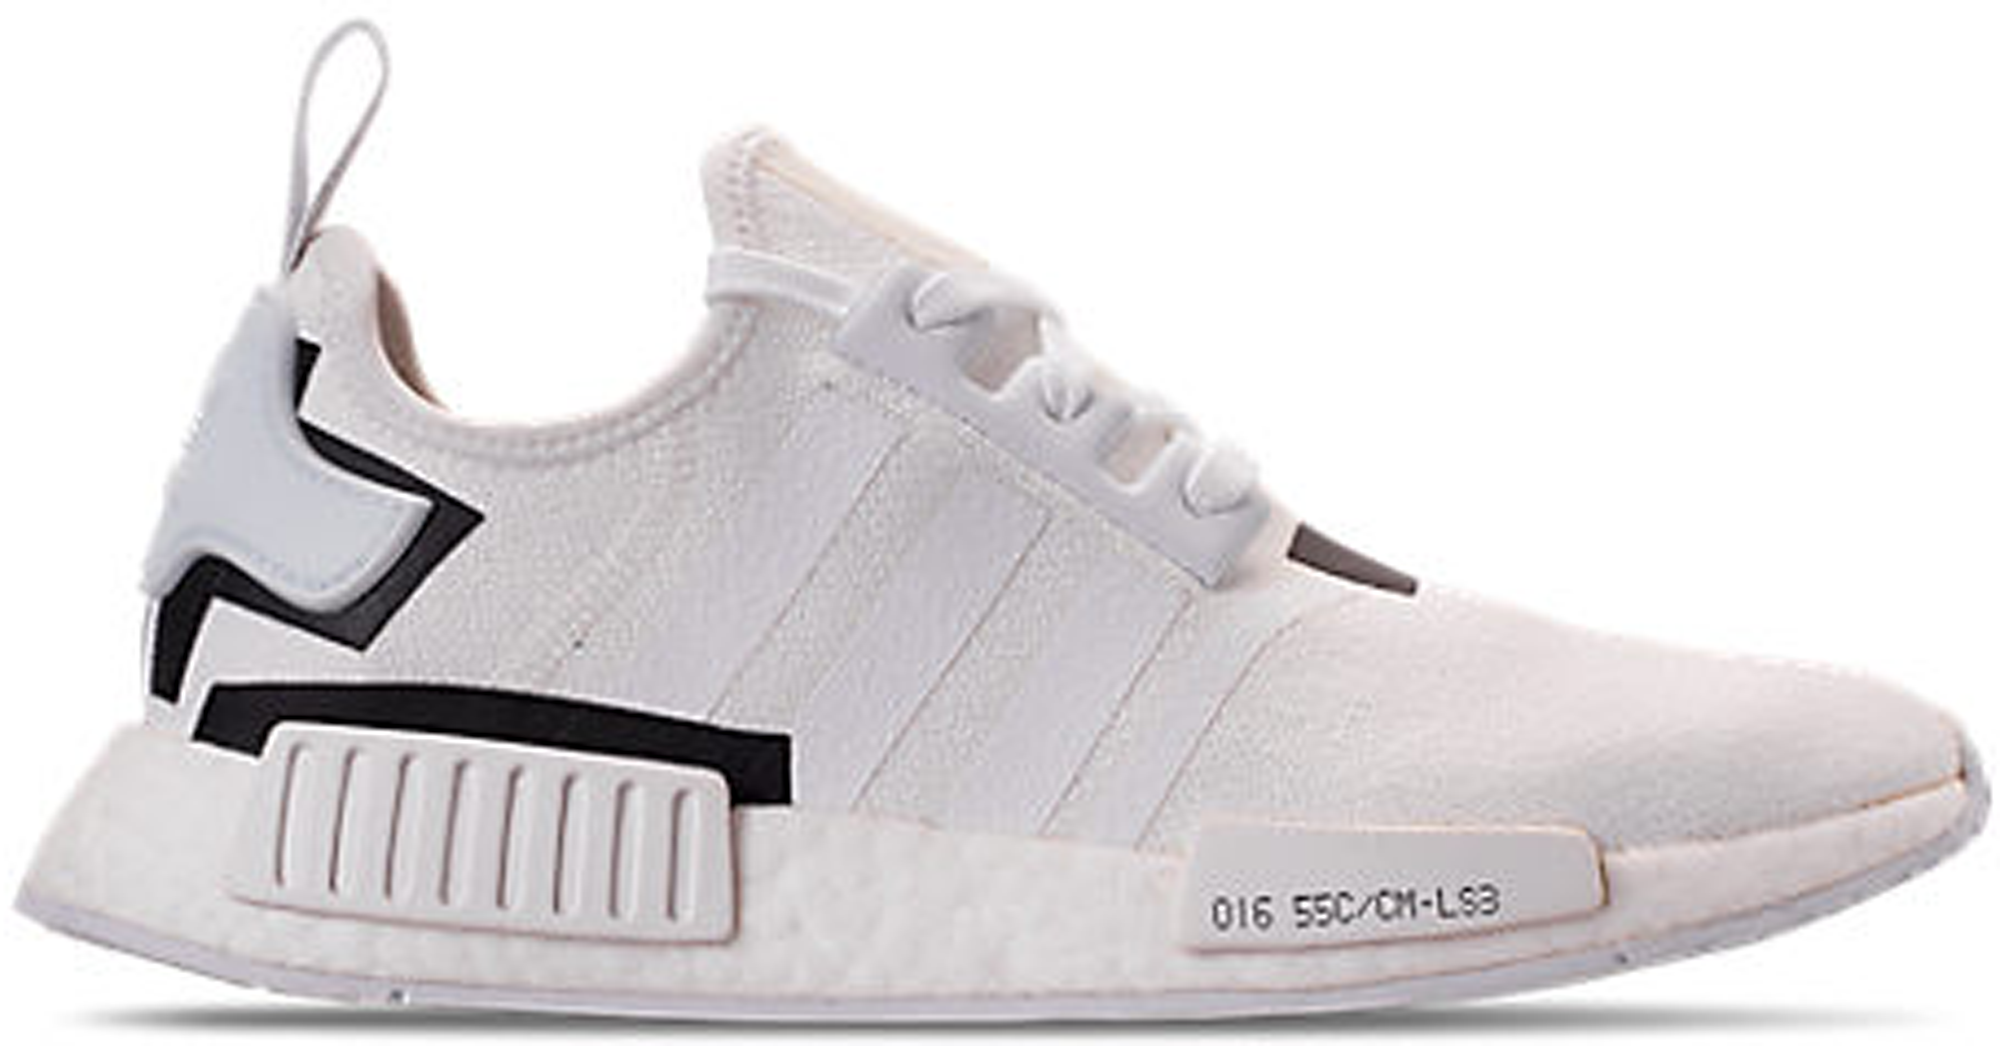 white and black adidas nmd r1